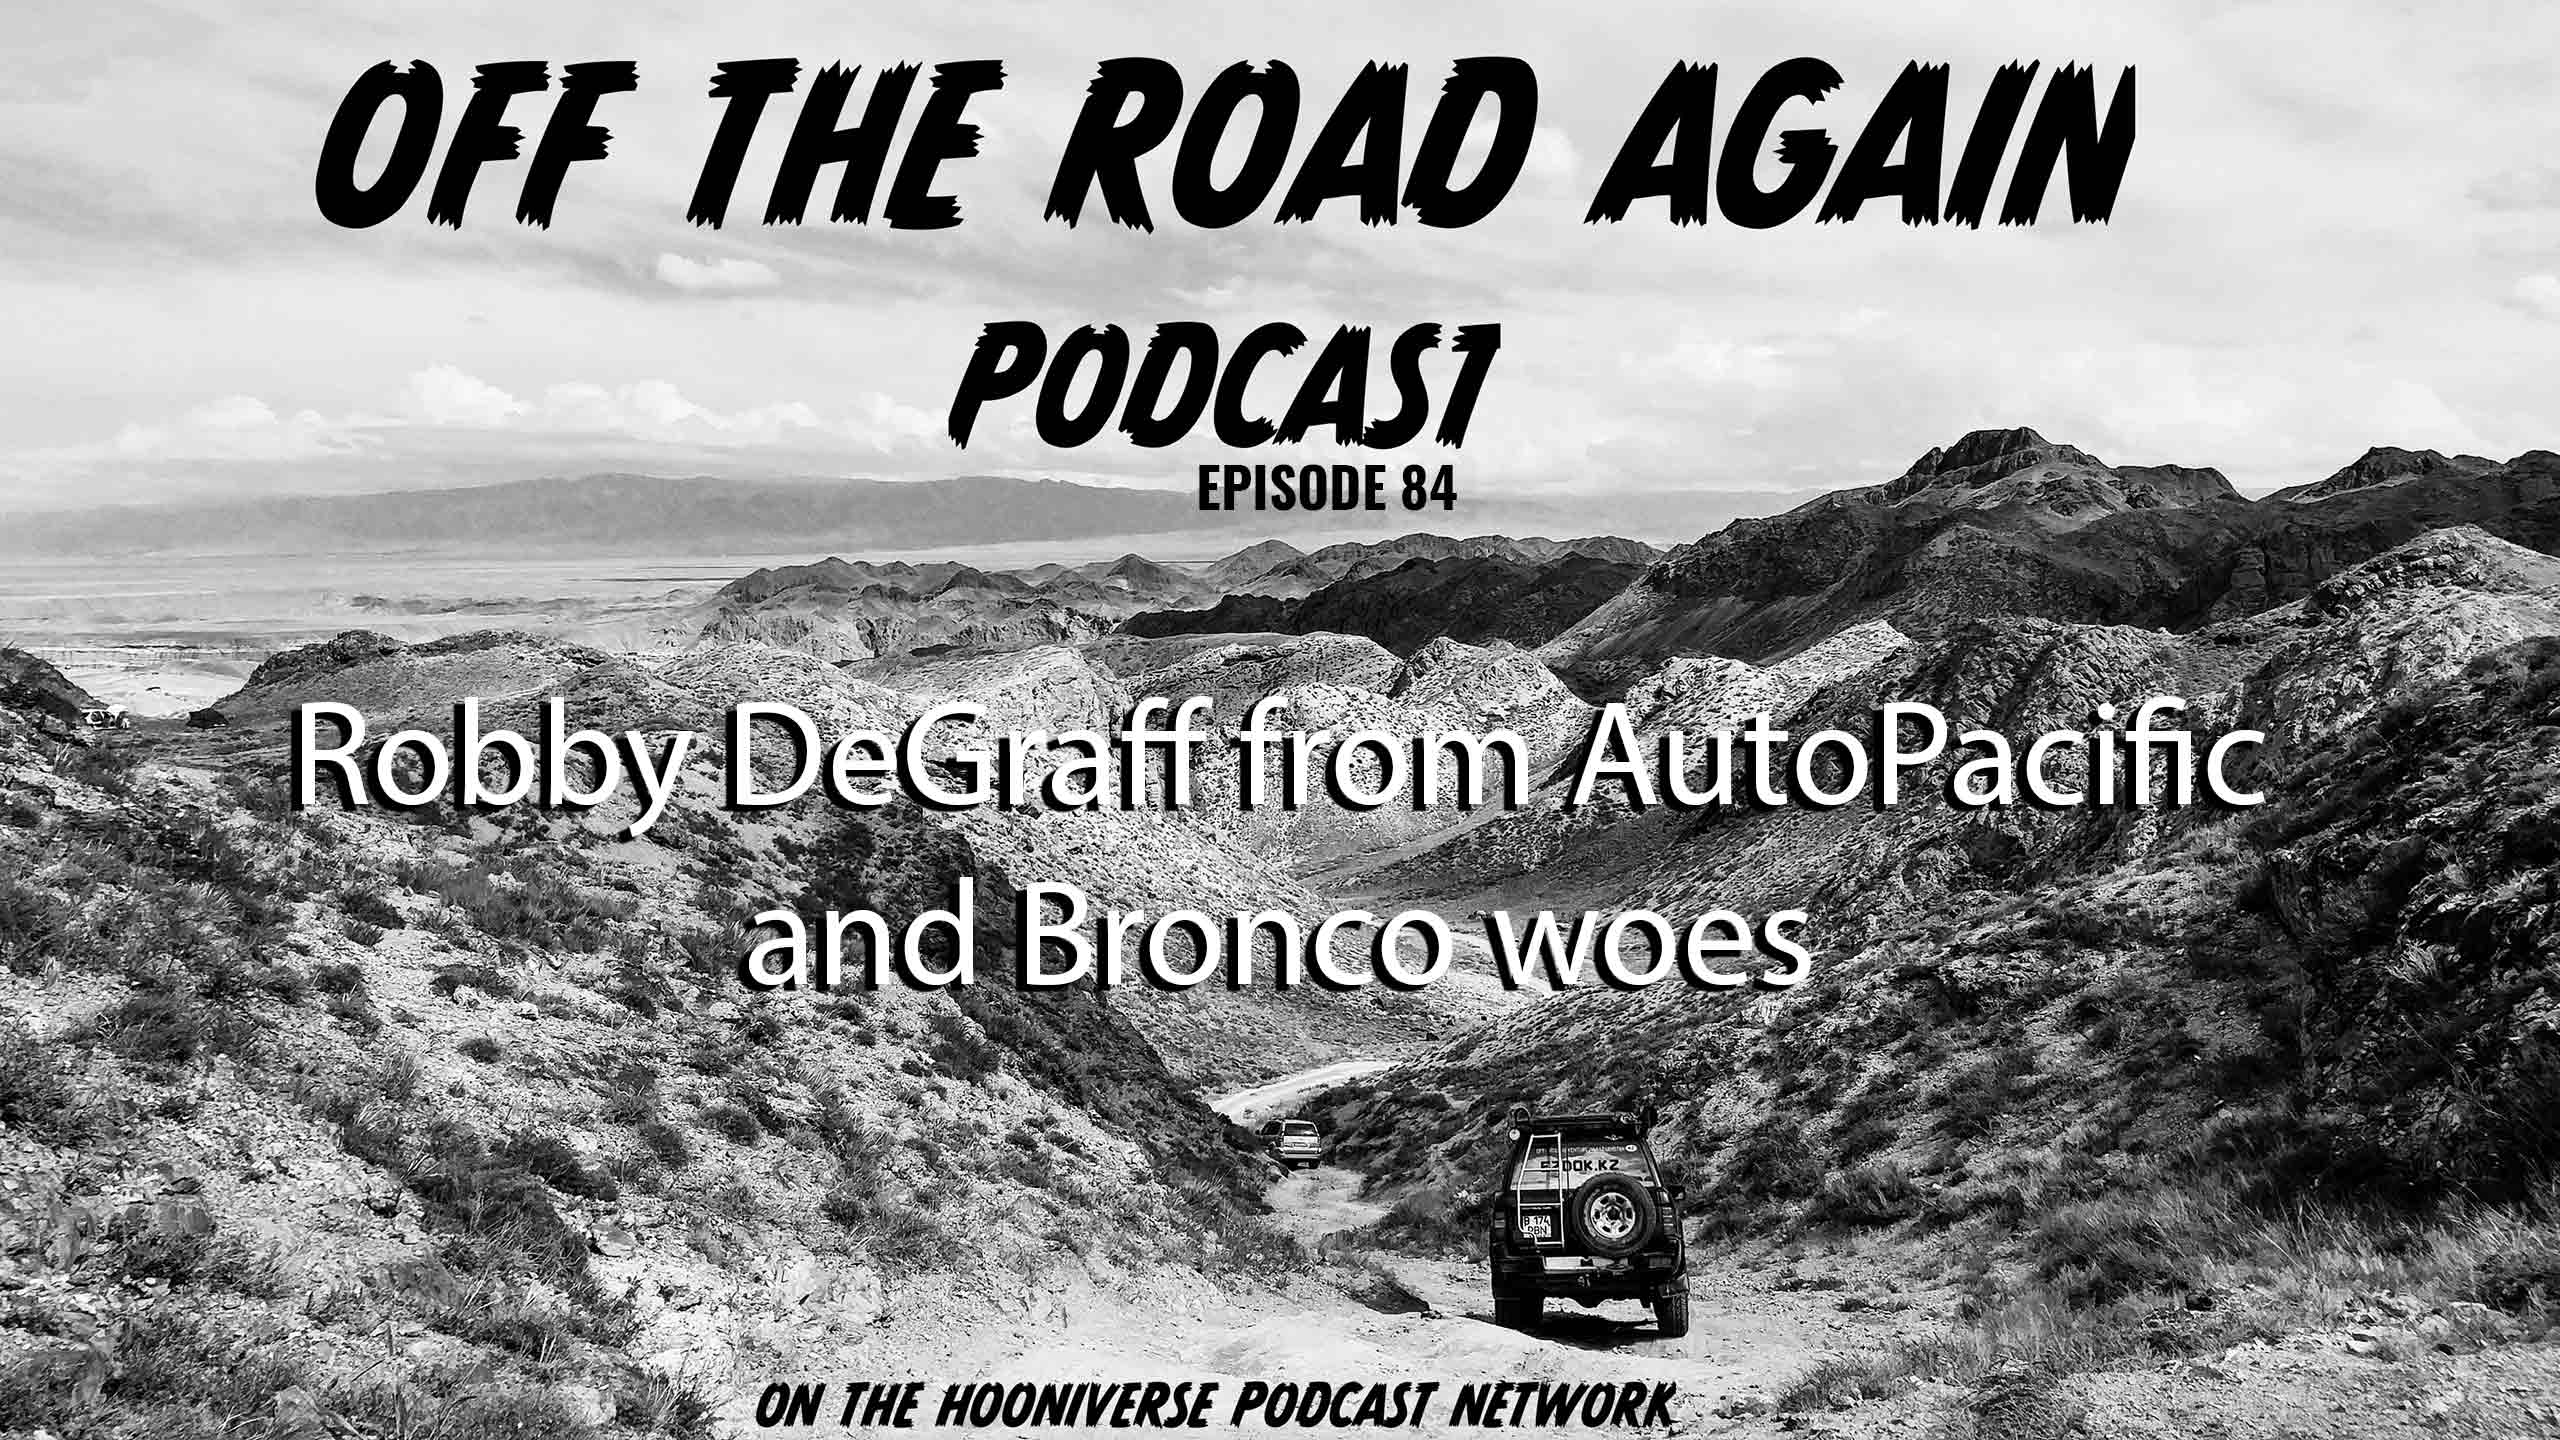 Robby-DeGraff-AutoPacific-Ford-Bronco-Off-The-Road-Again-Podcast-Episode-84